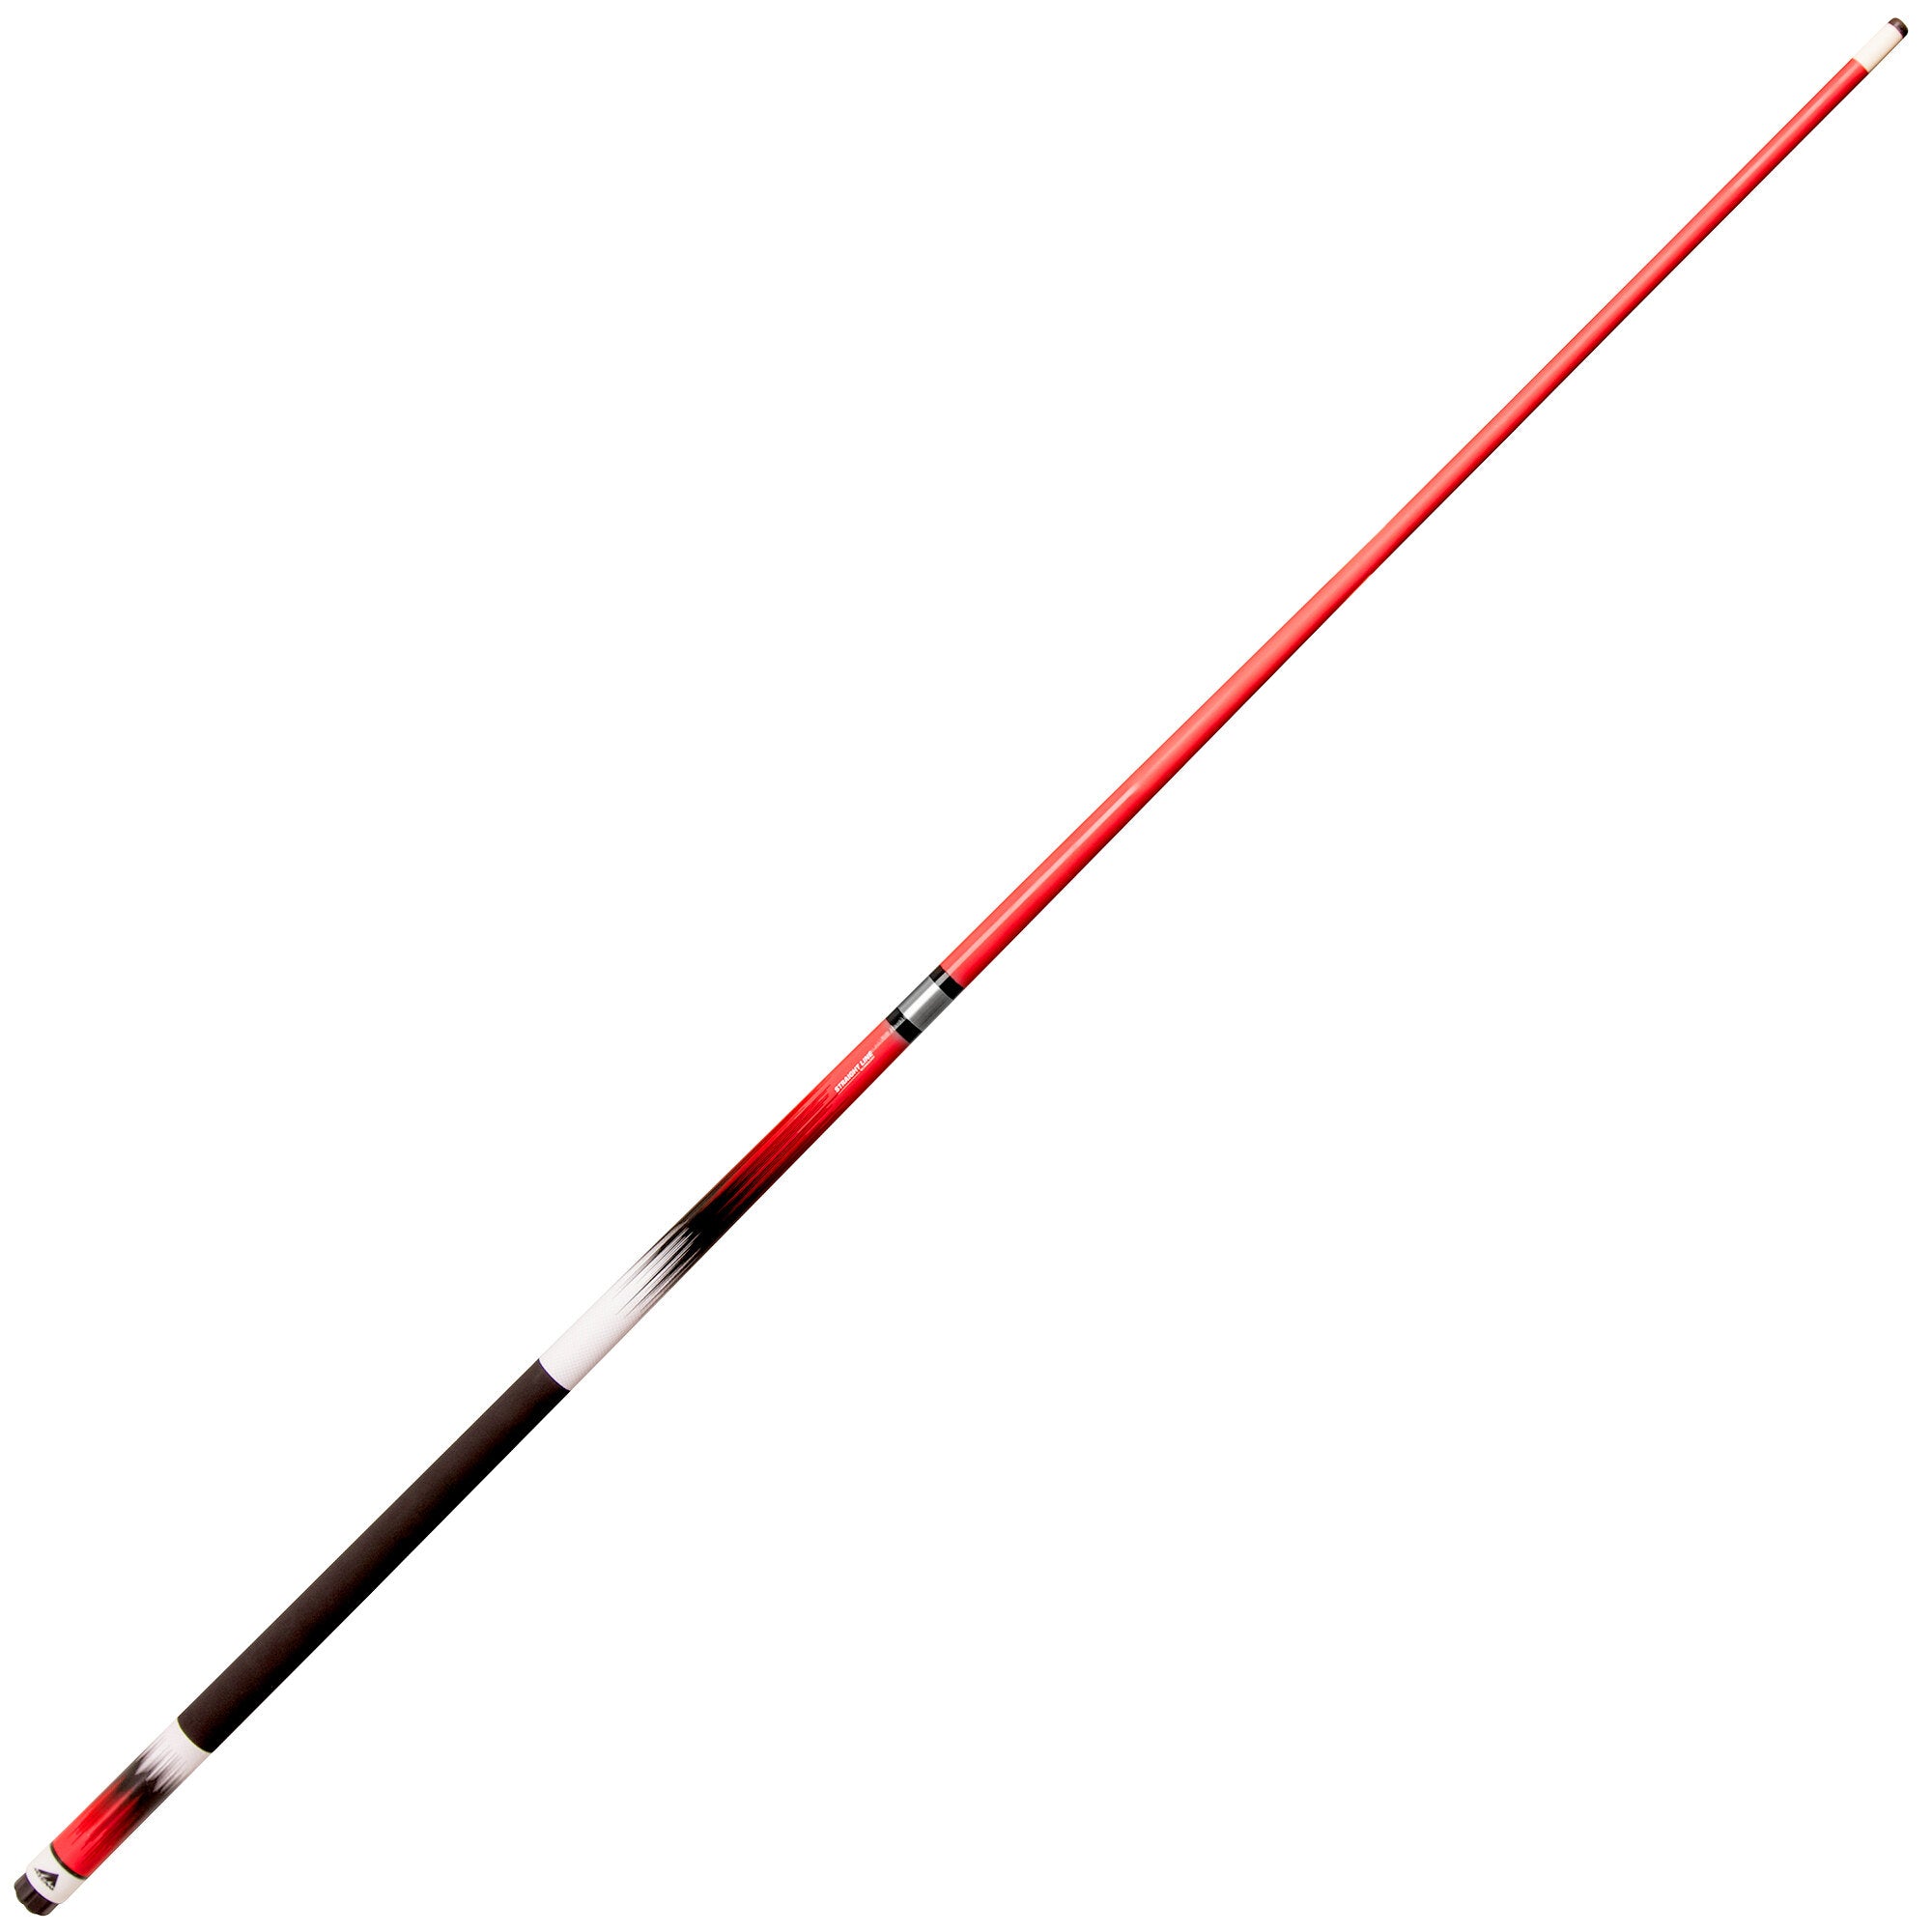 Mizerak P1881R 58" Two-Piece Neon Red Fade Deluxe Carbon Composite Billiard / Pool Cue with MicroTac Grip - P1881R